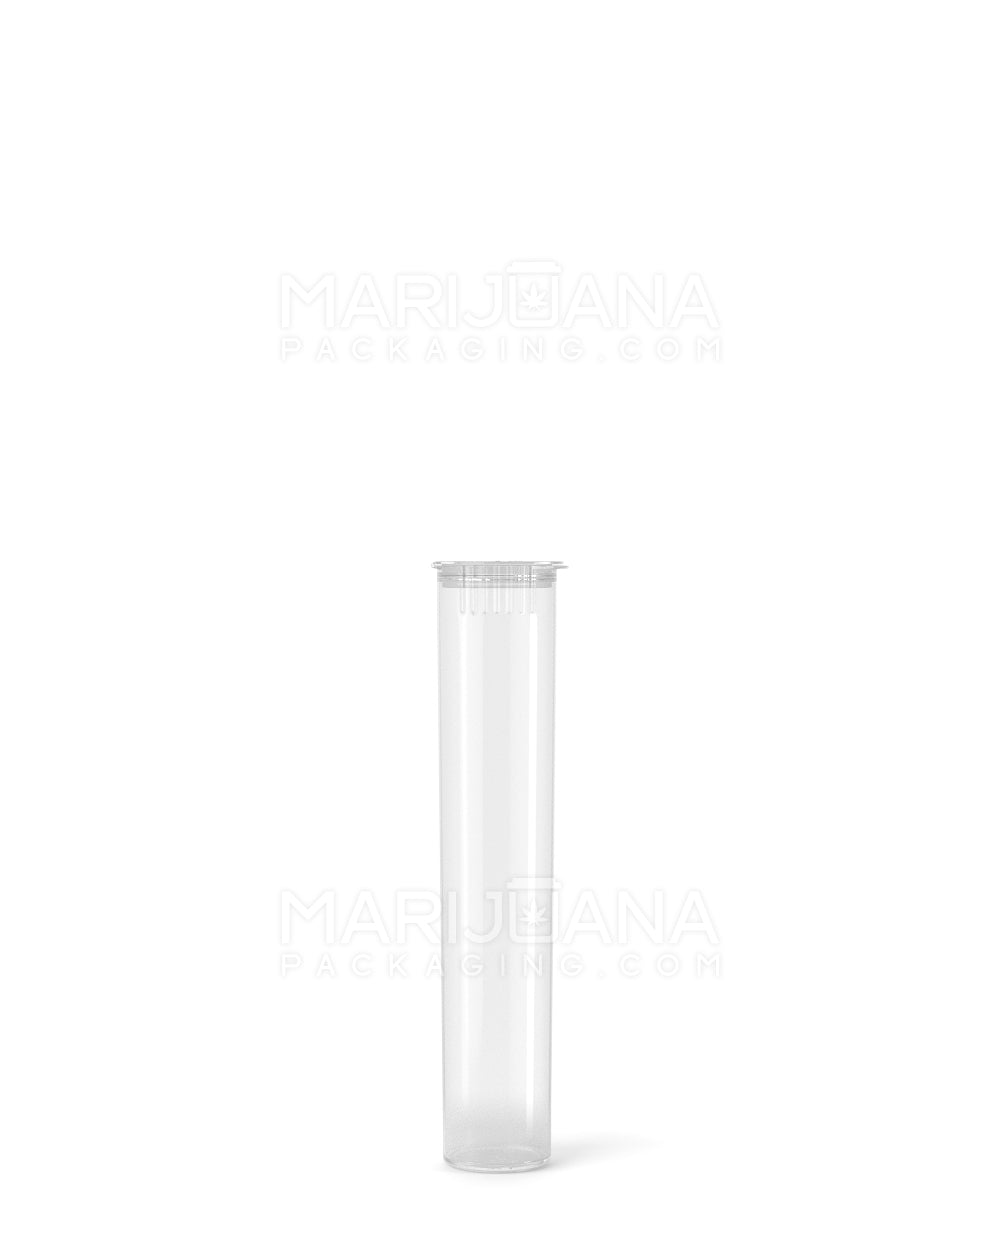 Child Resistant | Pop Top Plastic Pre-Roll Tubes | 70mm - Clear - 1000 Count - 3